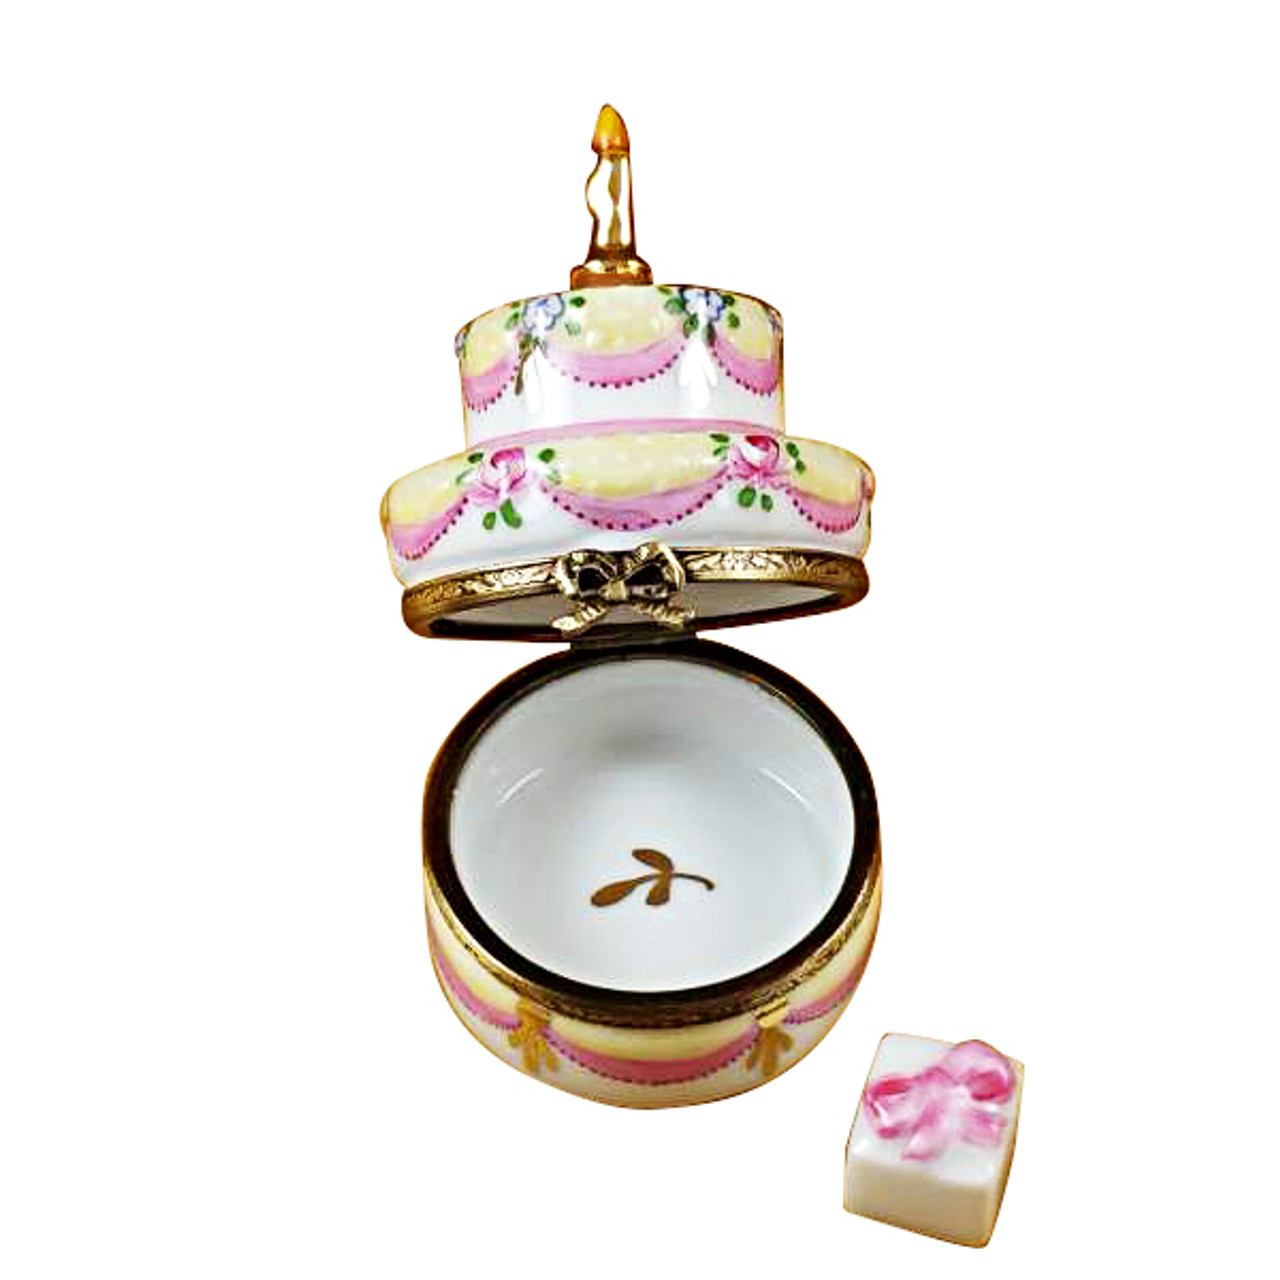 Two Layer Cake With Removable Porcelain Present Rochard Limoges Box